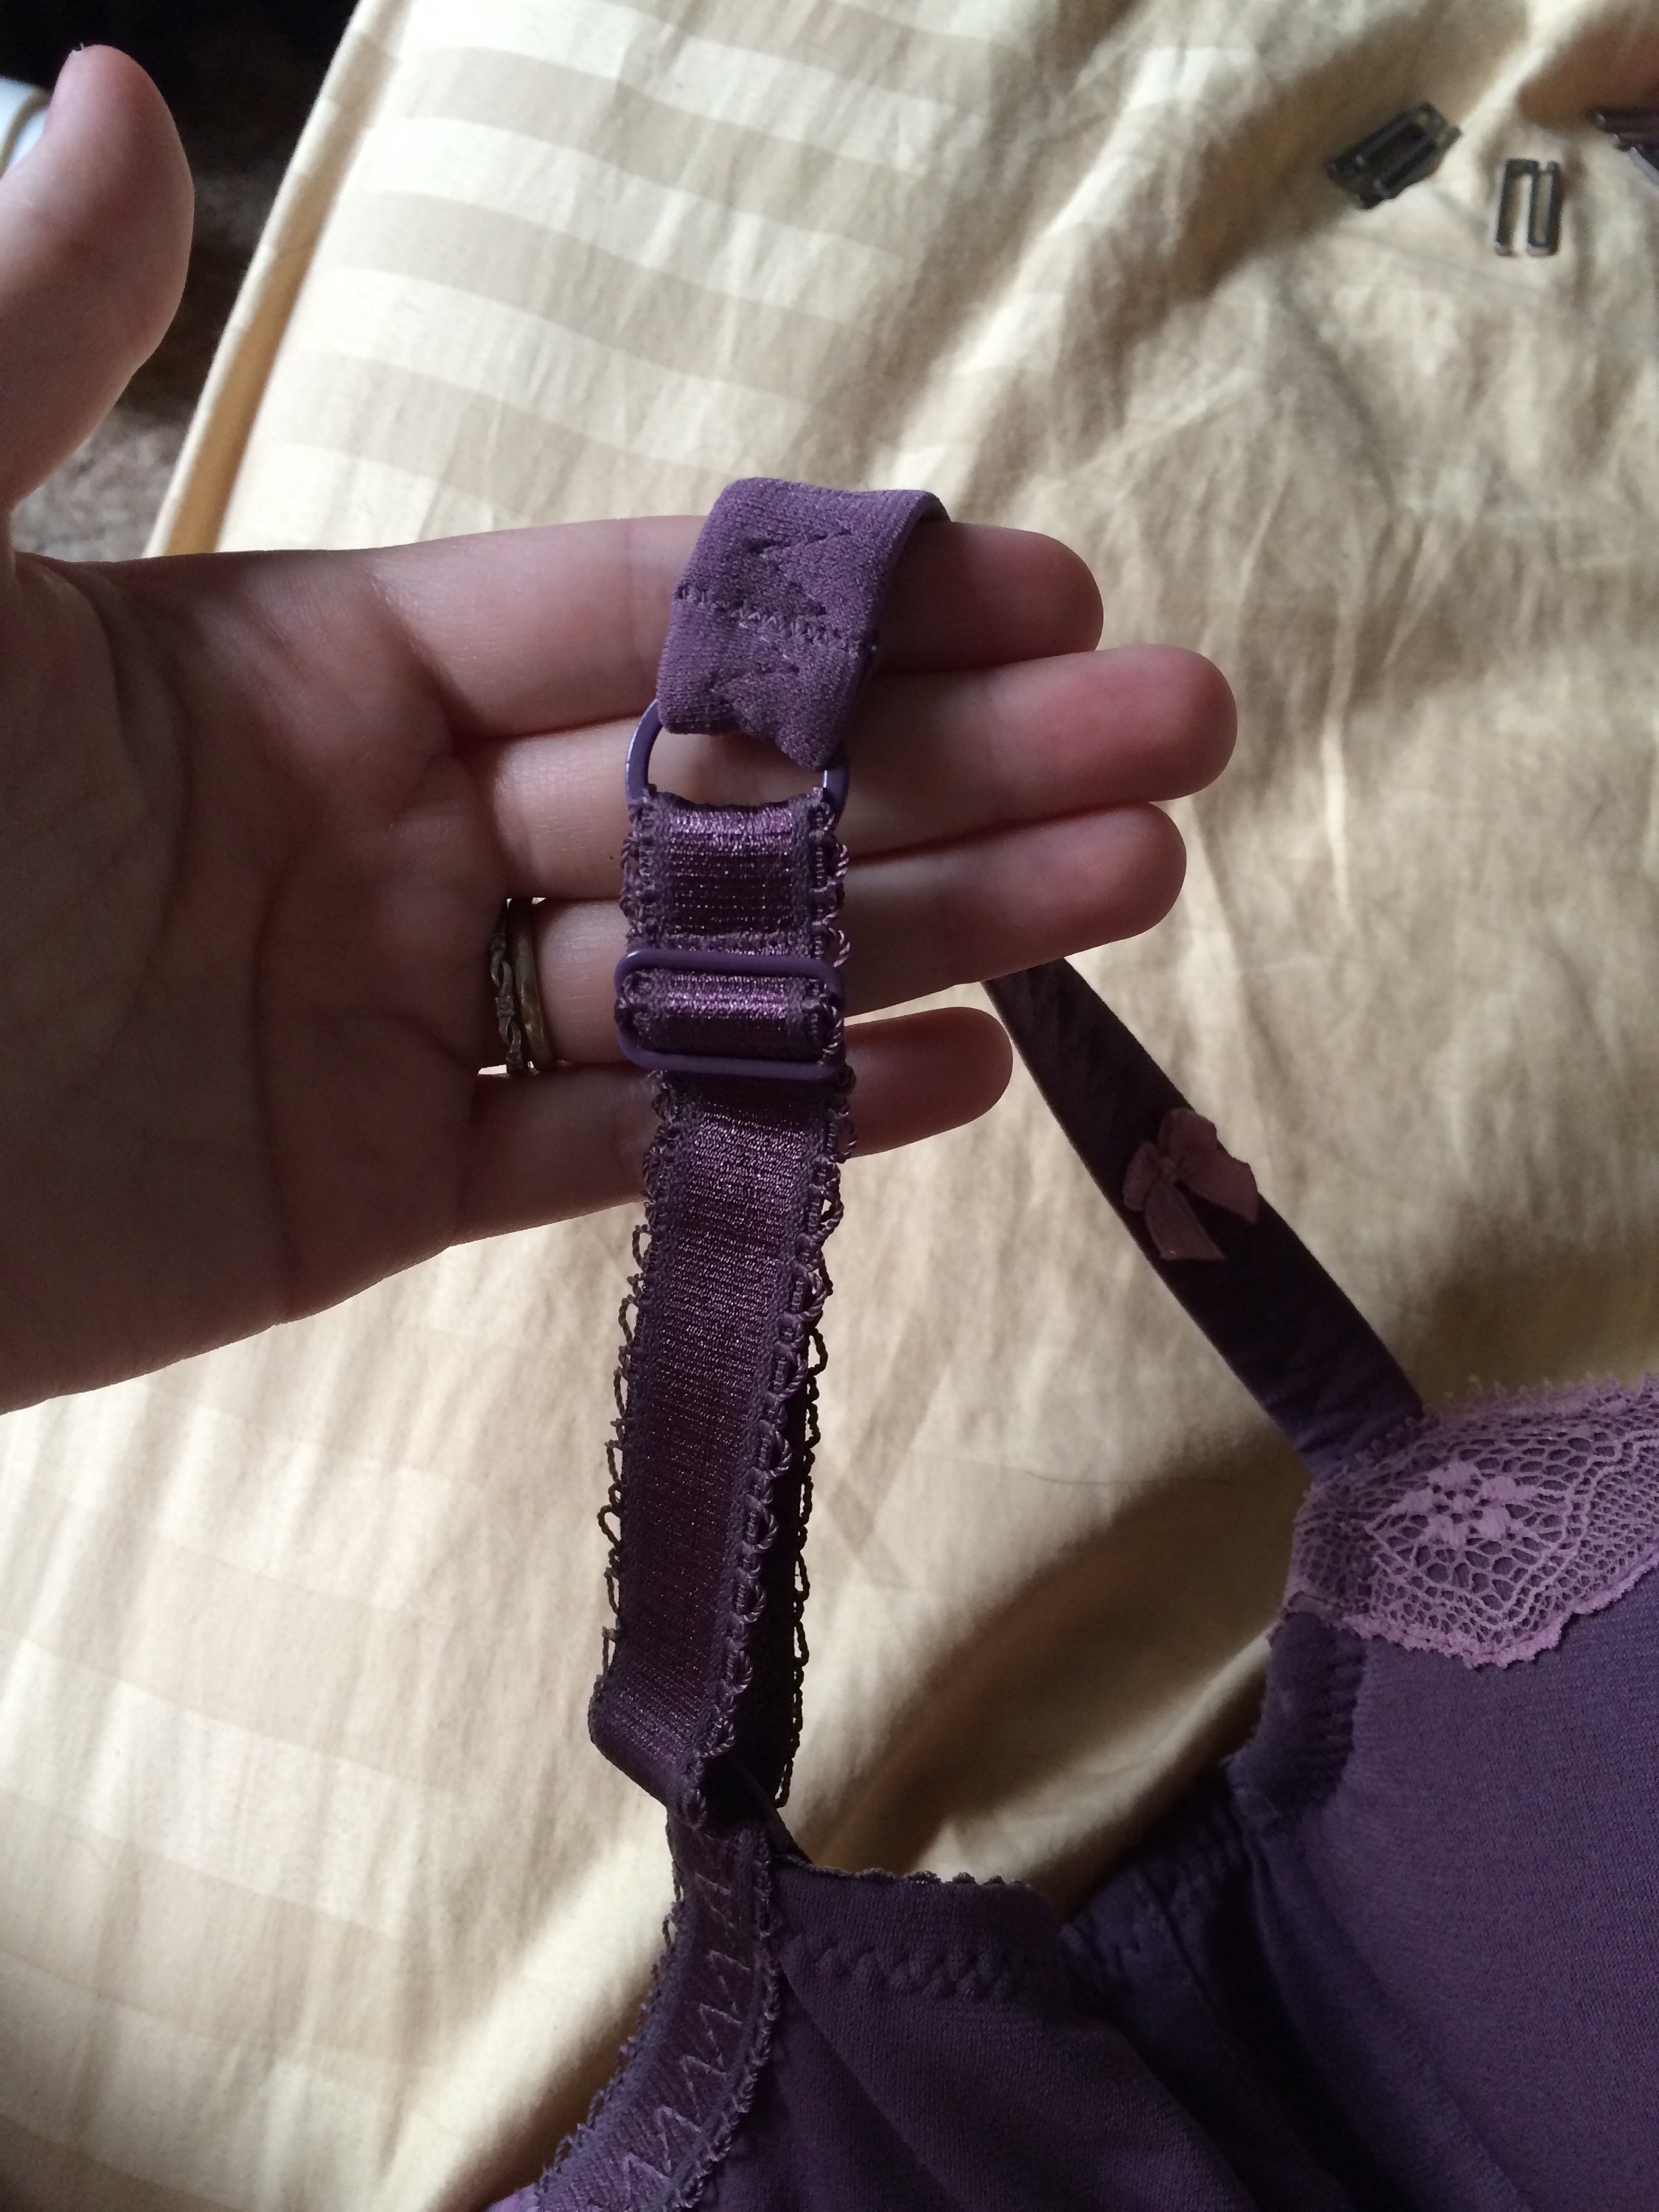 Review: The Extra Strength Strap Saver – A Tale of Two Boobs.